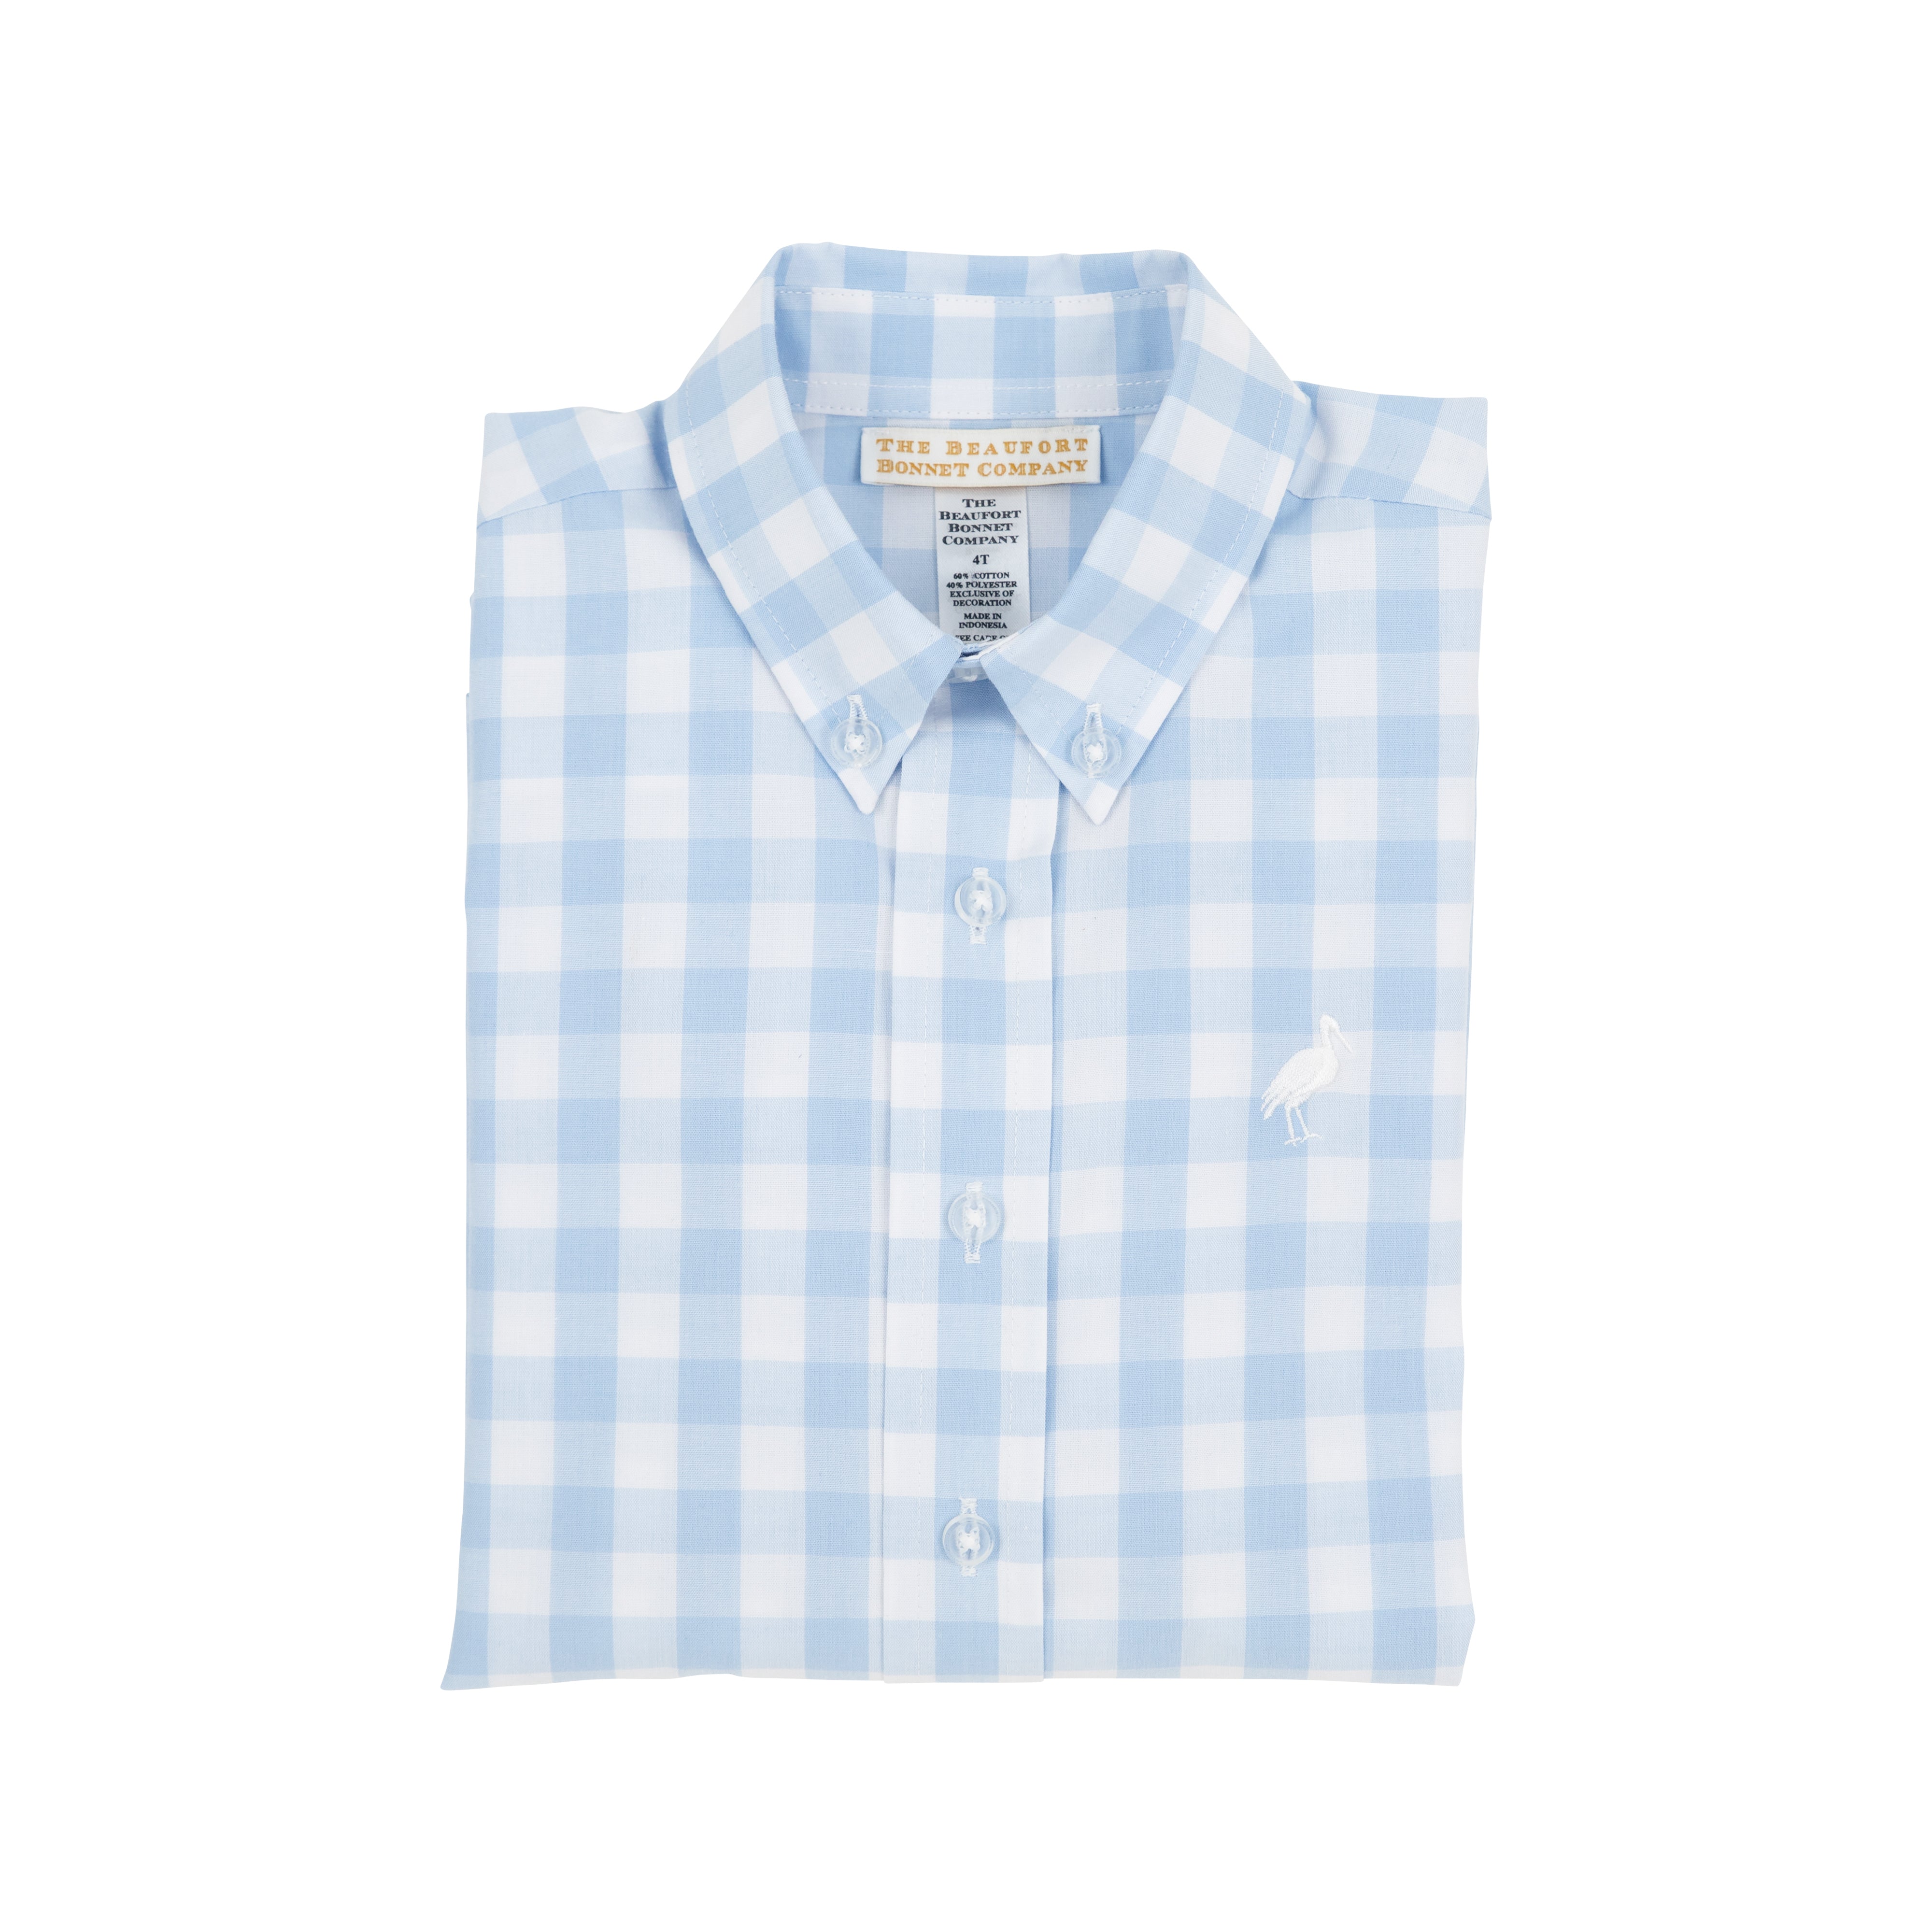 Dean's List Dress Shirt - Beale Street Blue Check with Worth Avenue Wh ...